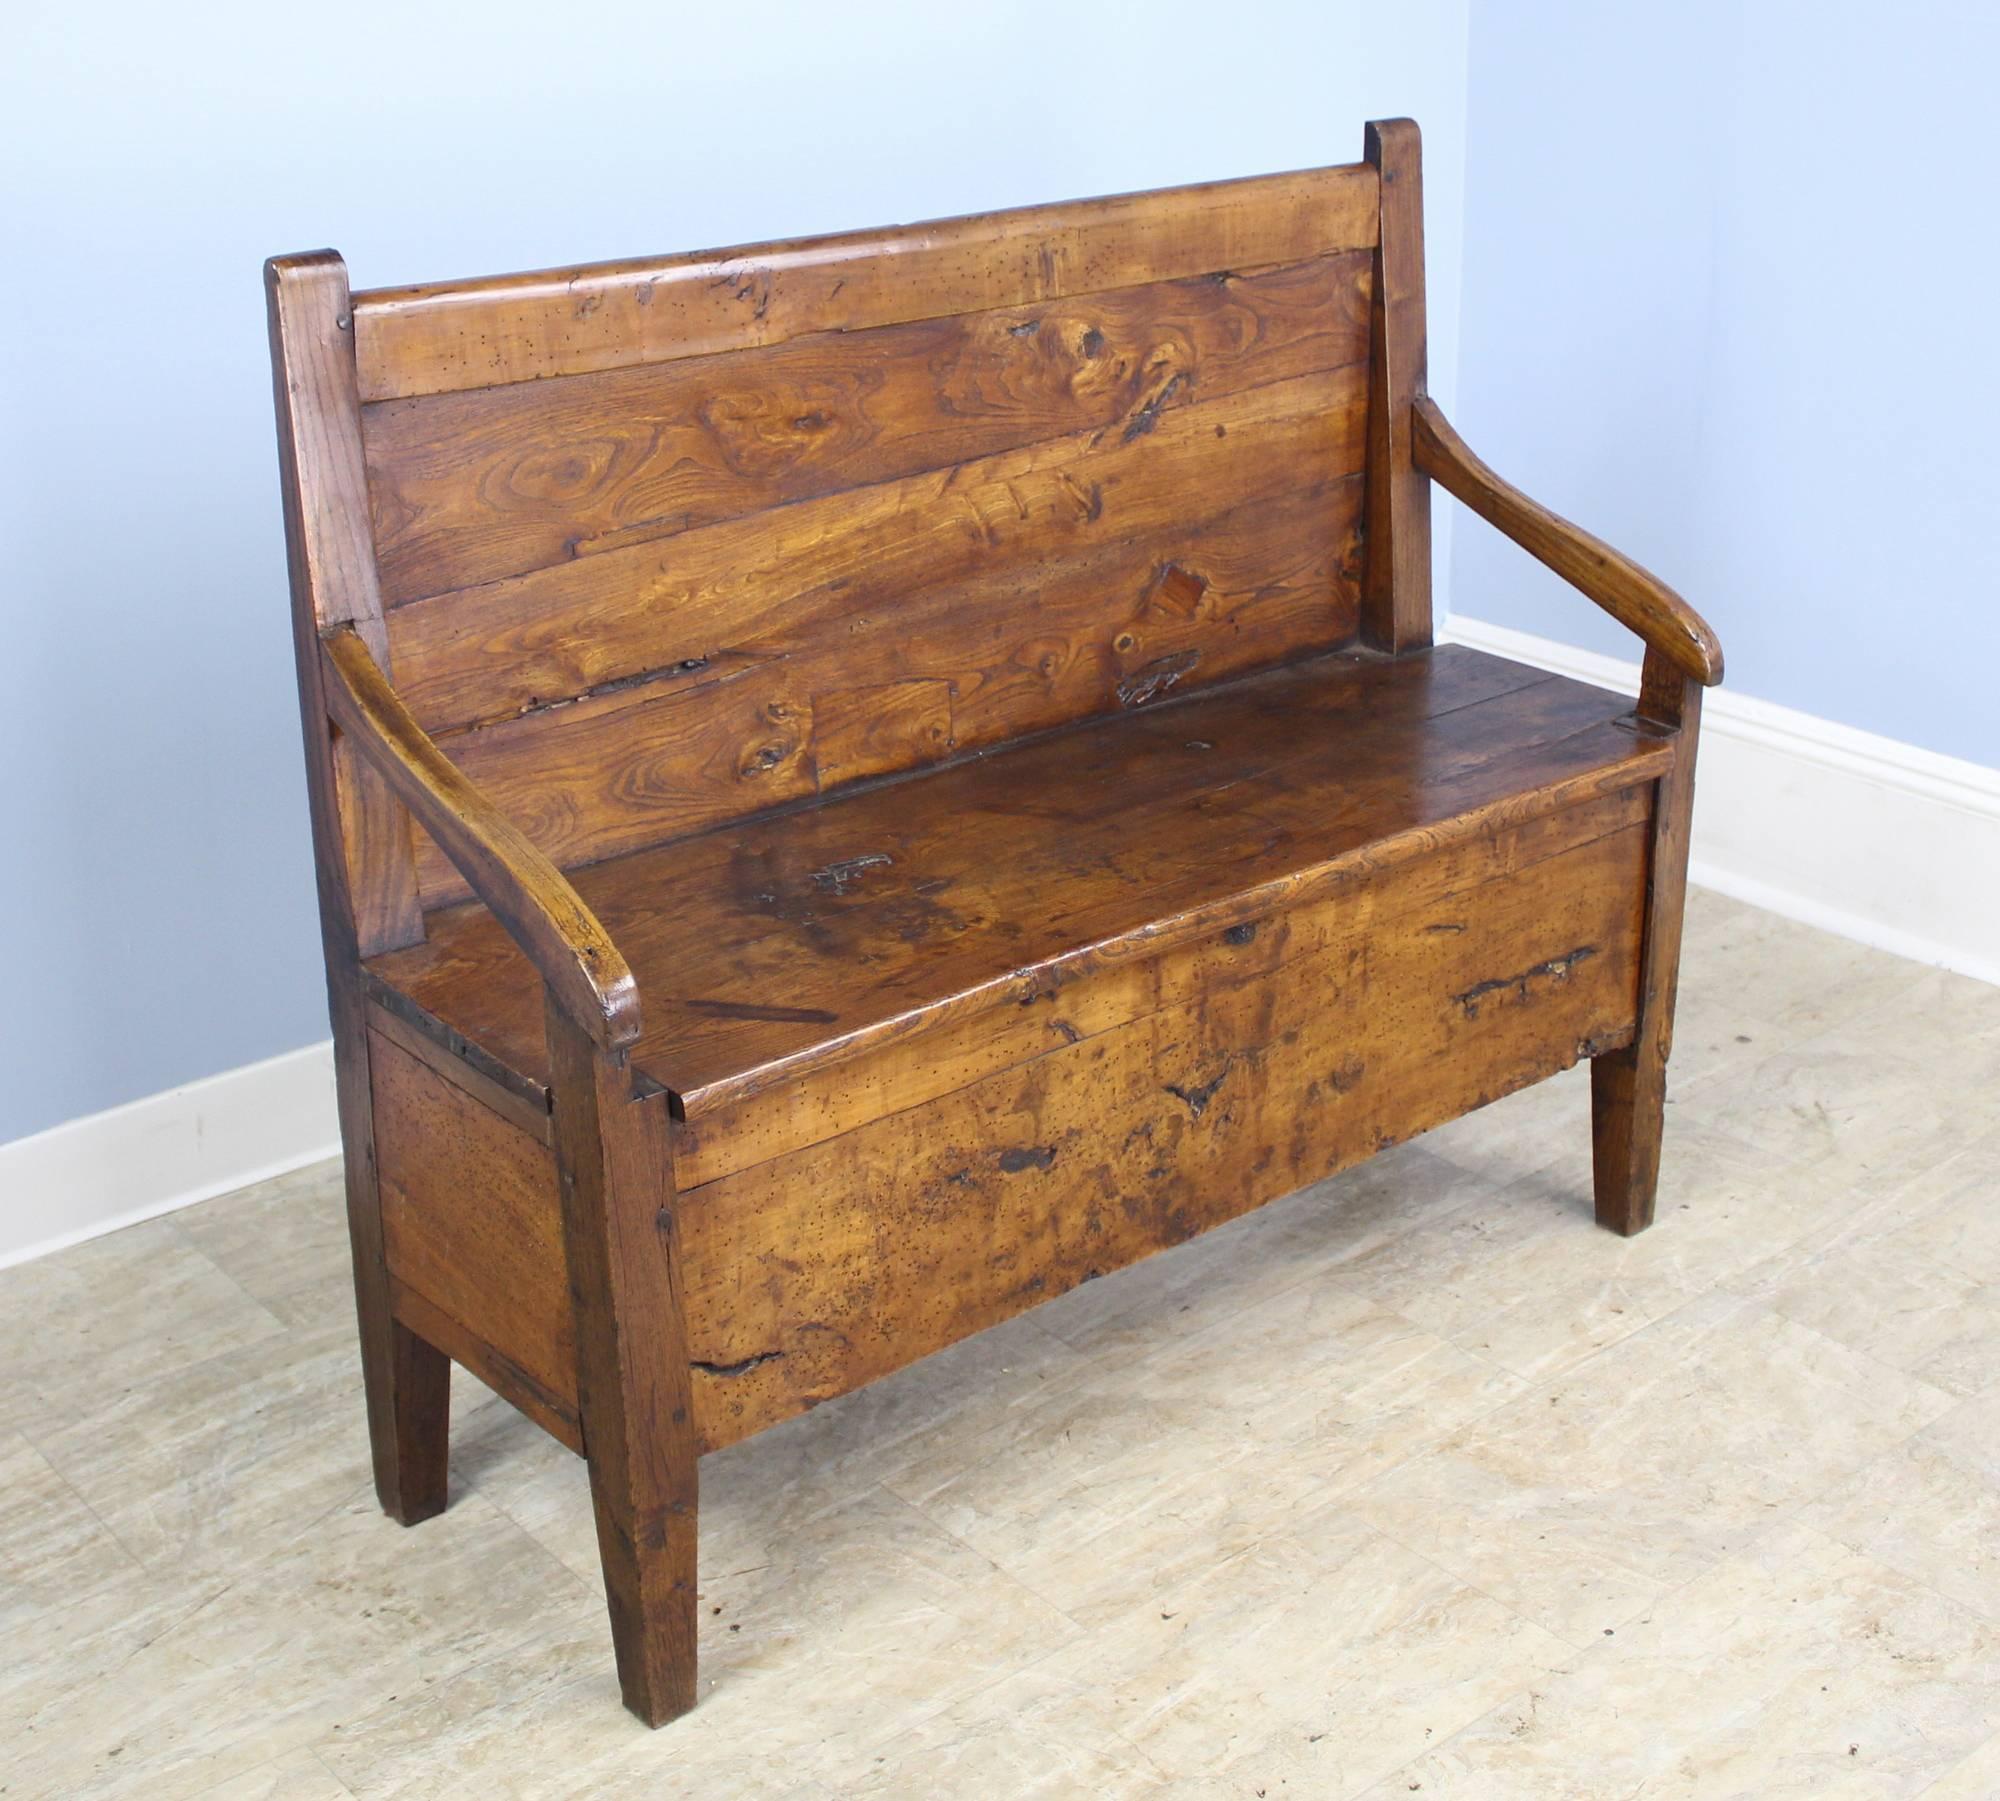 This country ash bench has some of the most spectacular grain we have seen! A simple Silhouette with a high back and gently sloping arms. The small drawer at one end of the seat adds a nice design note. Wonderful patina and color. Height measurement